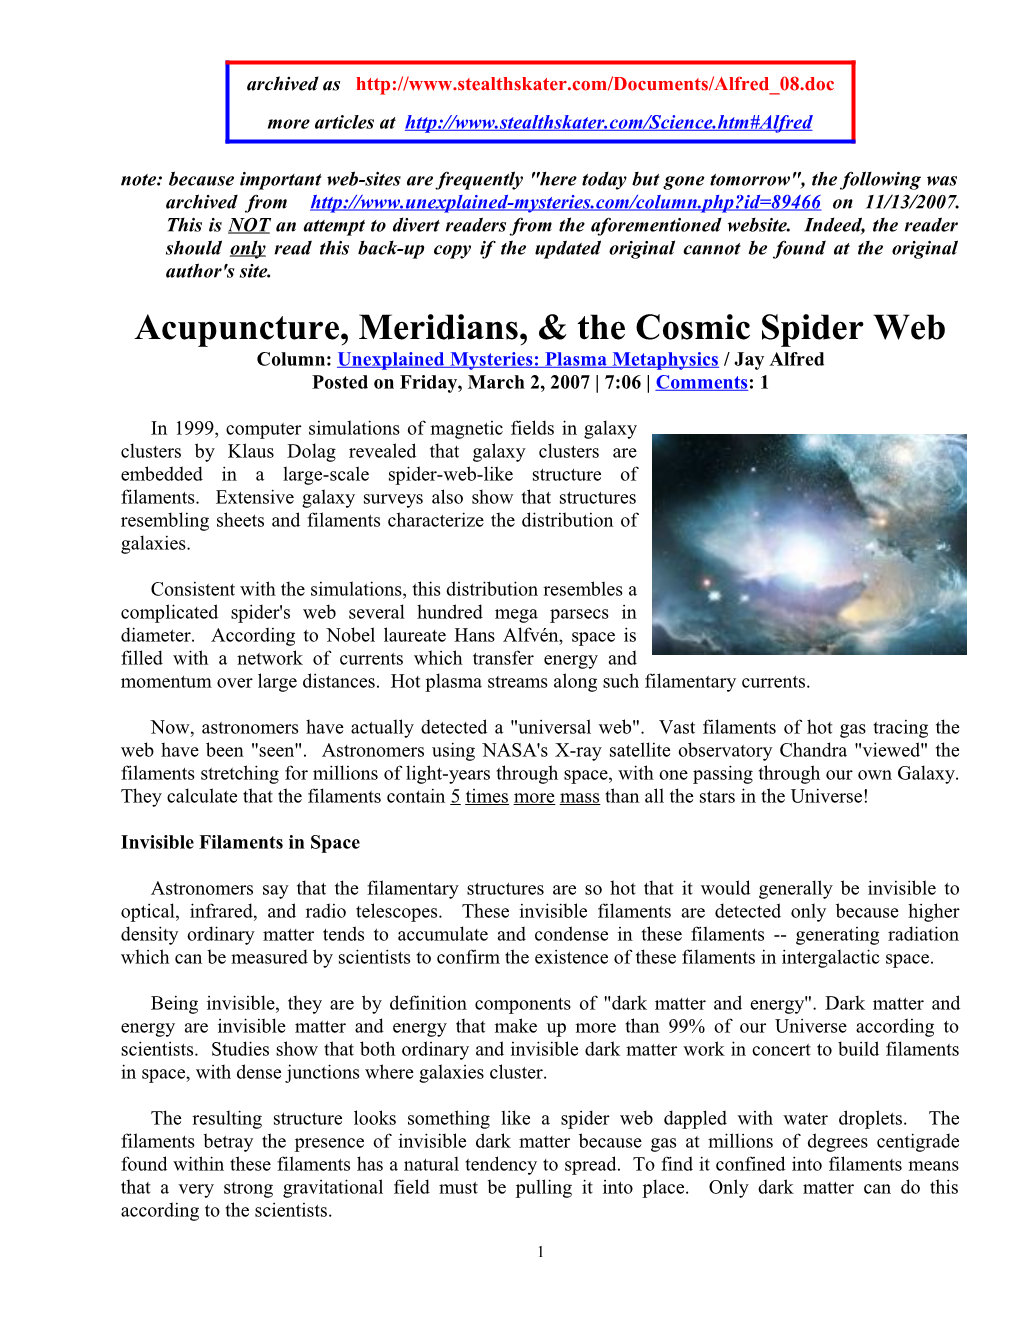 Acupuncture, Meridians, & the Cosmic Spider Web